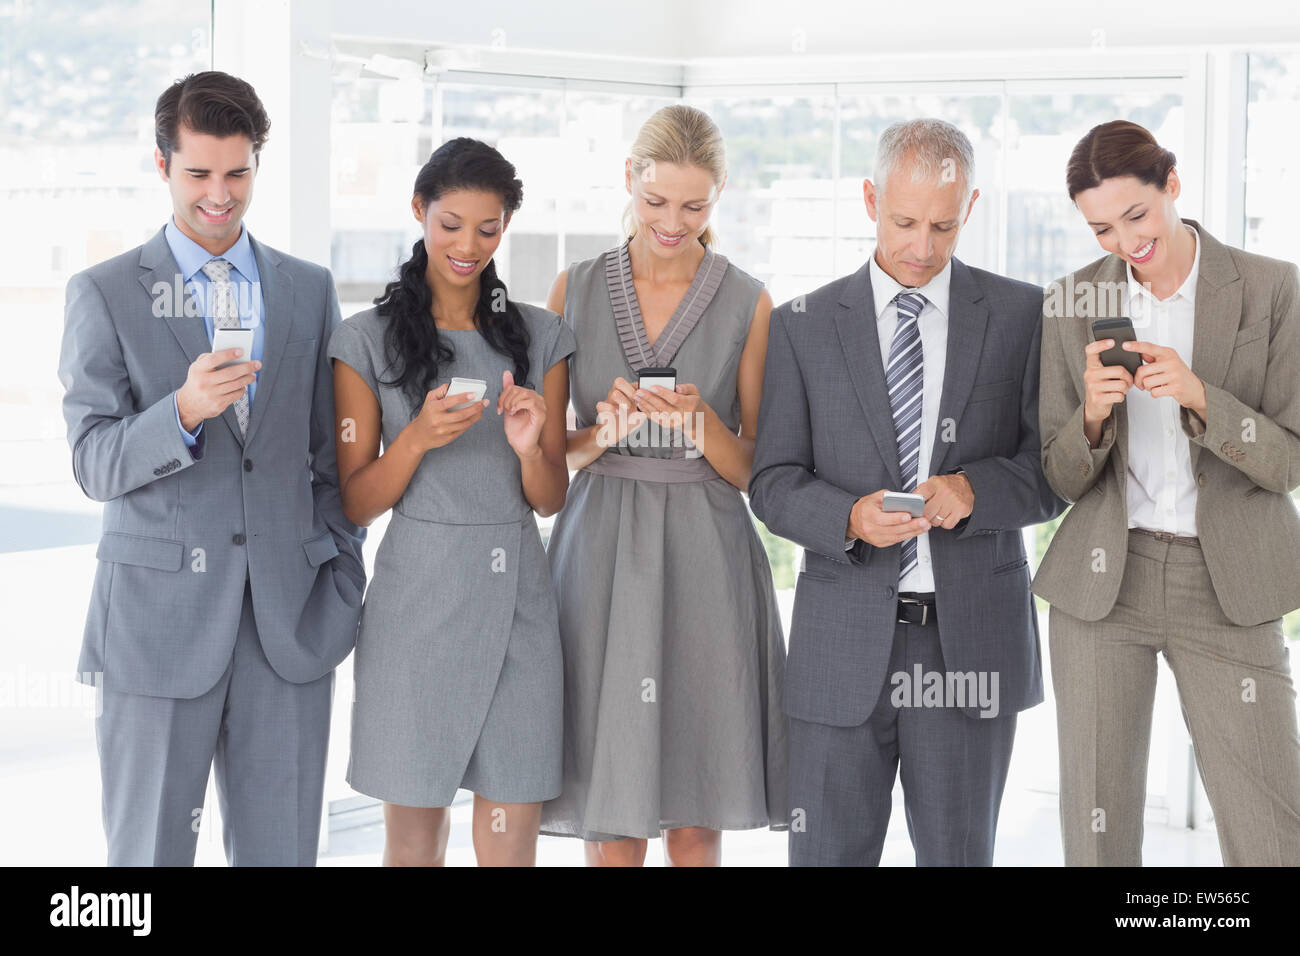 Employees using their mobile phone Stock Photo